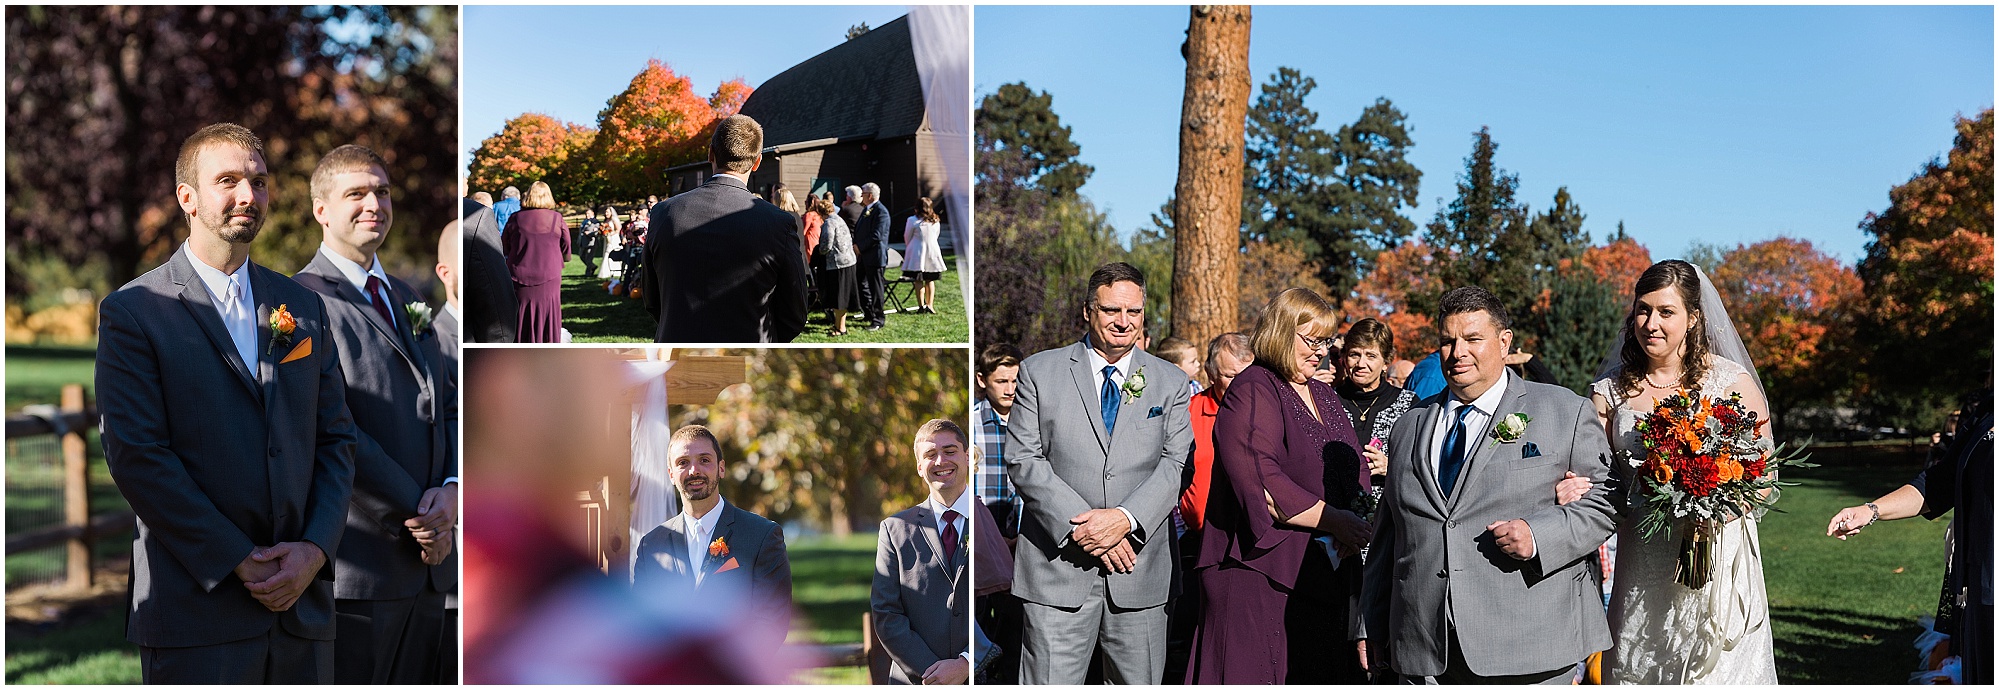 A groom sees his bride for the first time as she walks down the aisle of her outdoor ceremony at a Hollinshead Barn fall wedding in Bend, OR. | Erica Swantek Photography